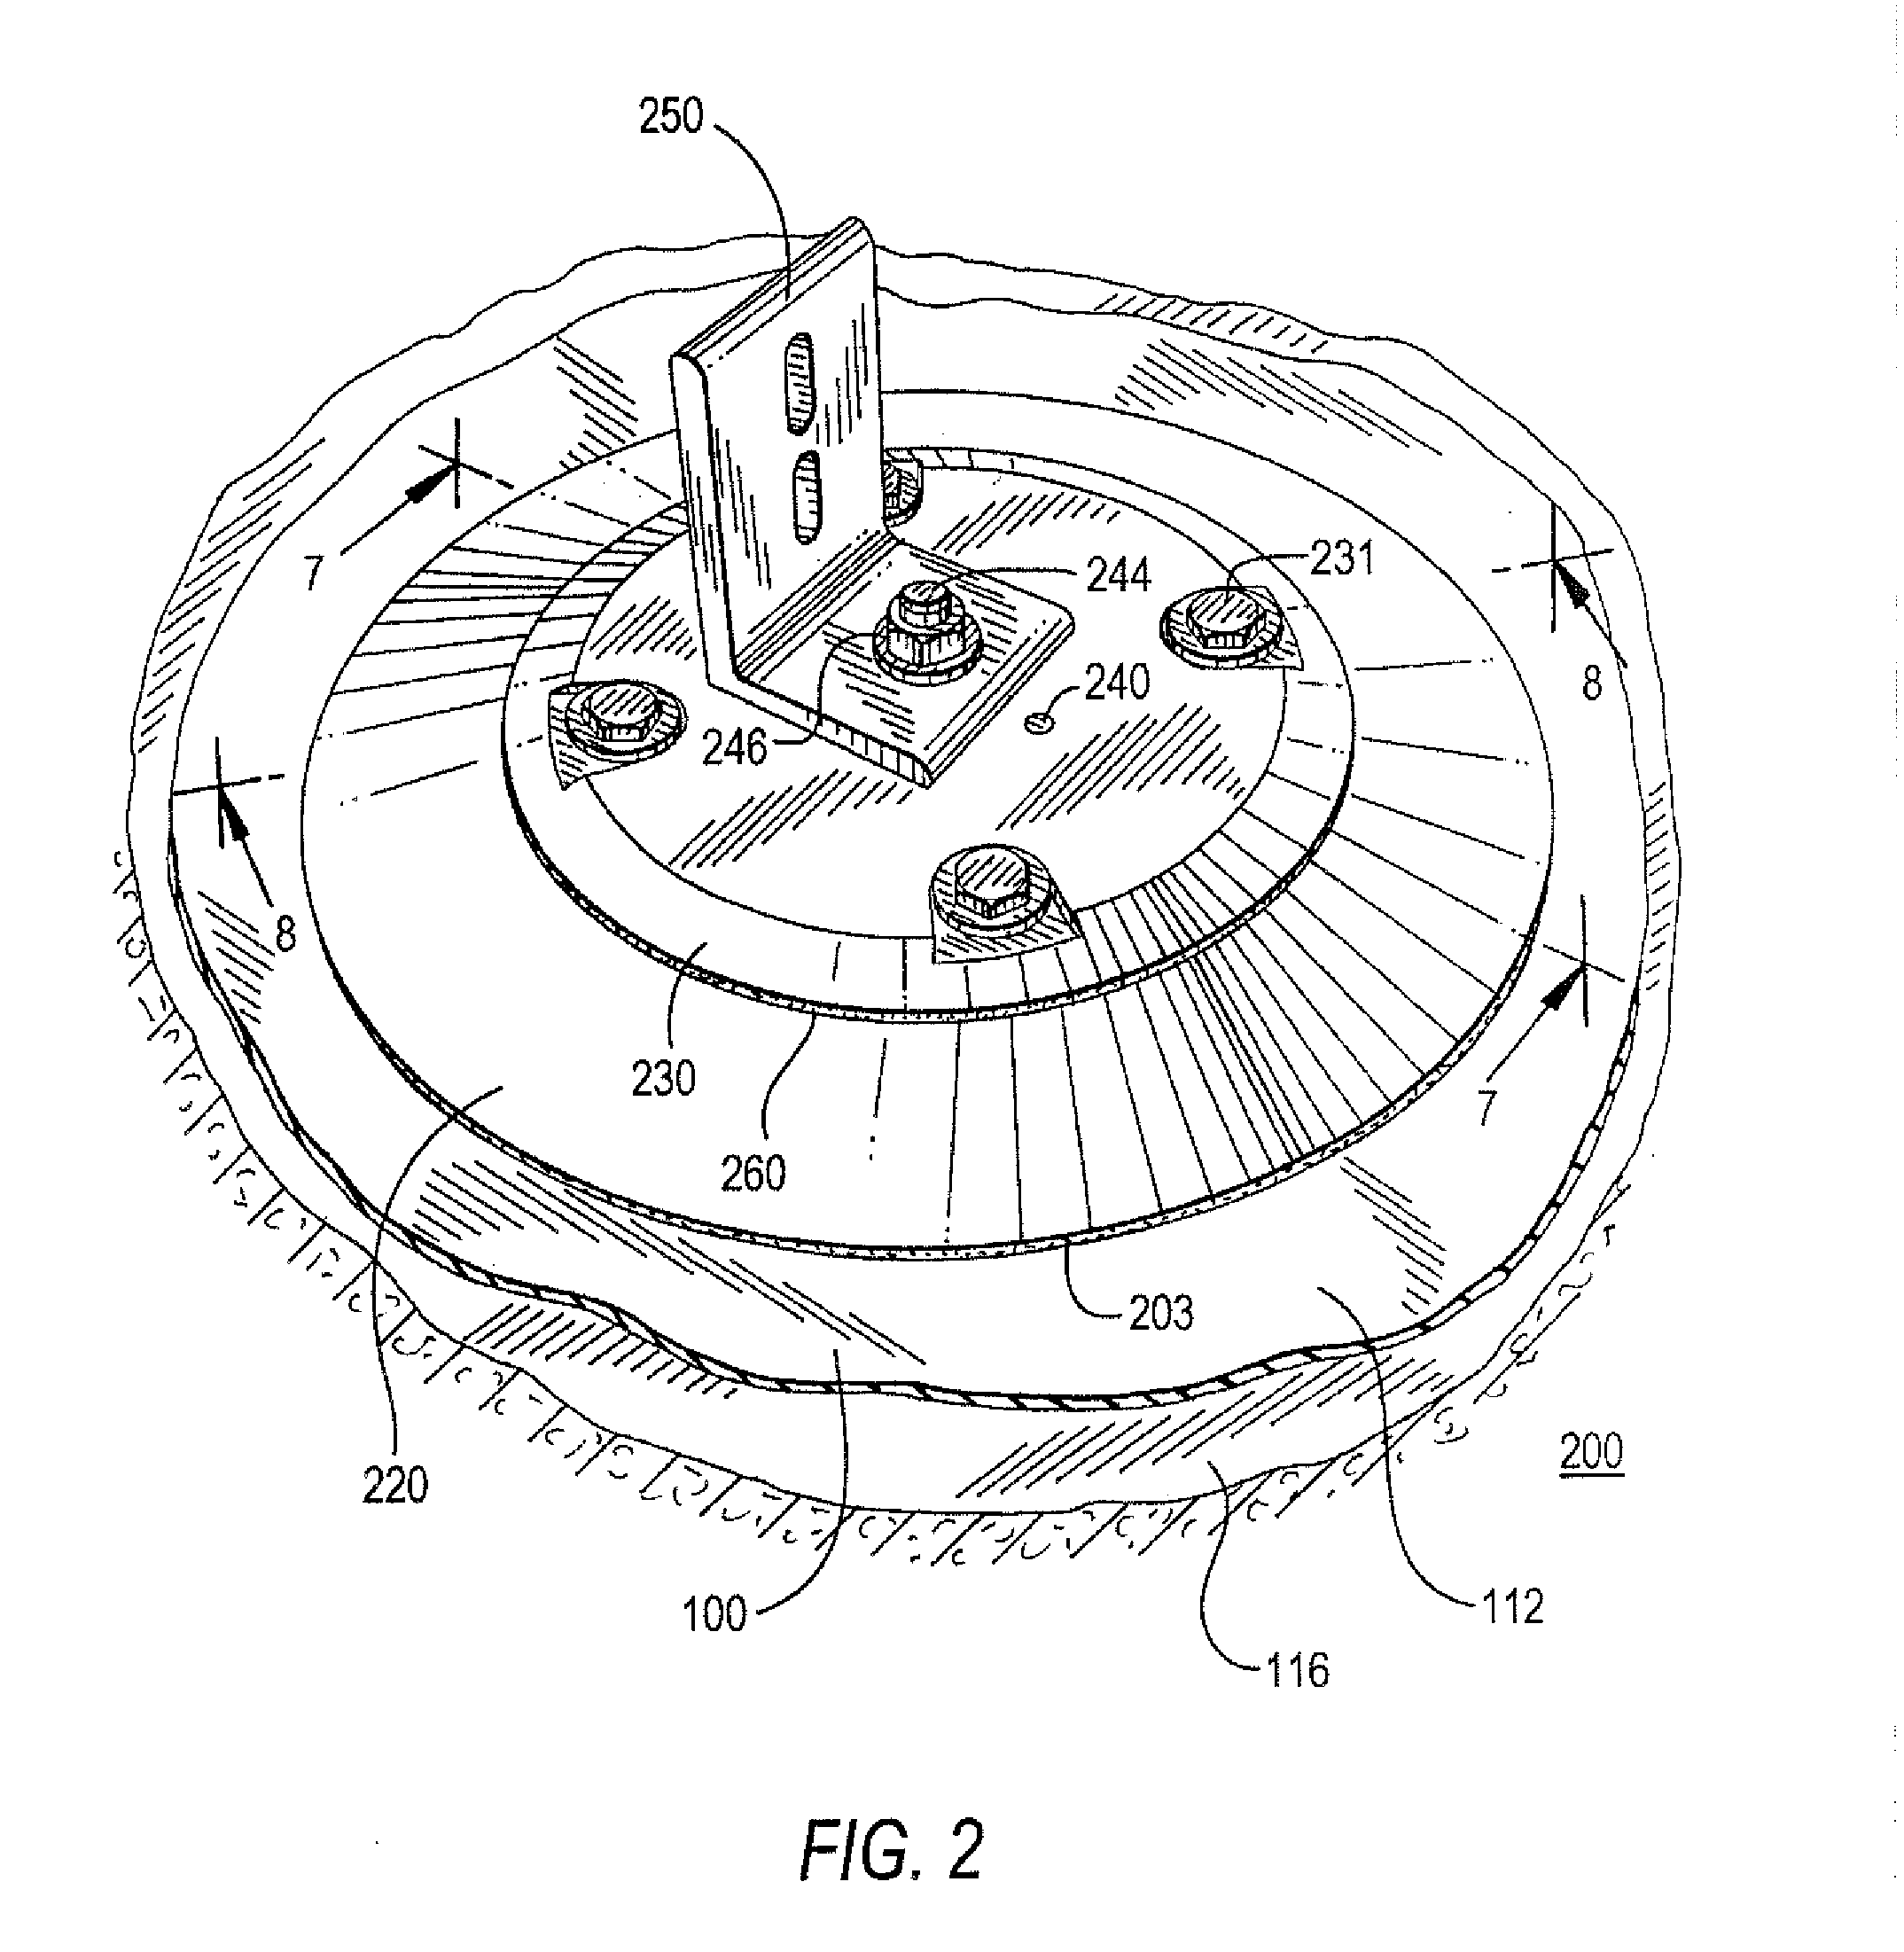 Non-invasive roof mounting adaptor and method for installing same